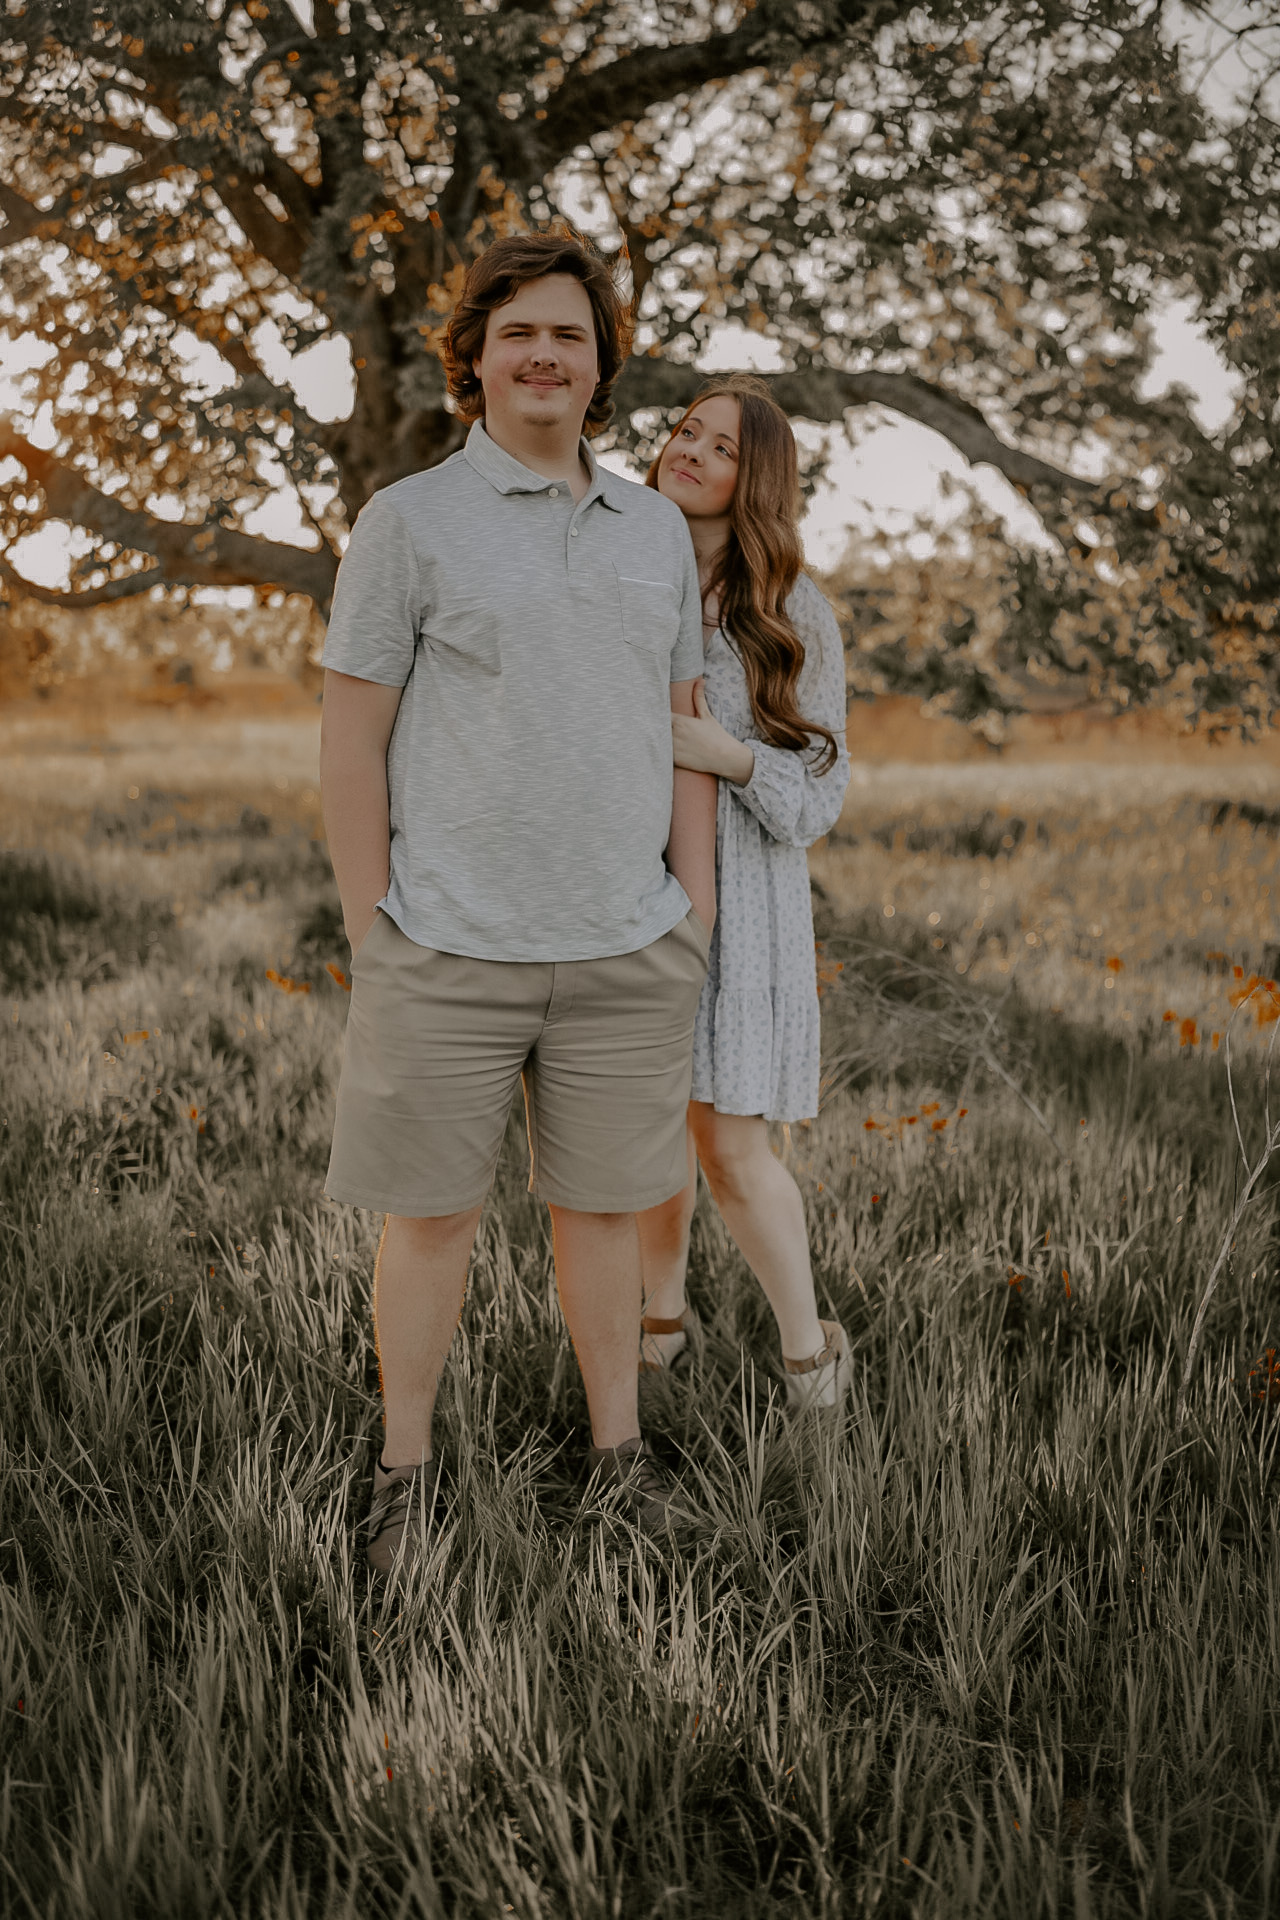 Our Engagement Pictures!